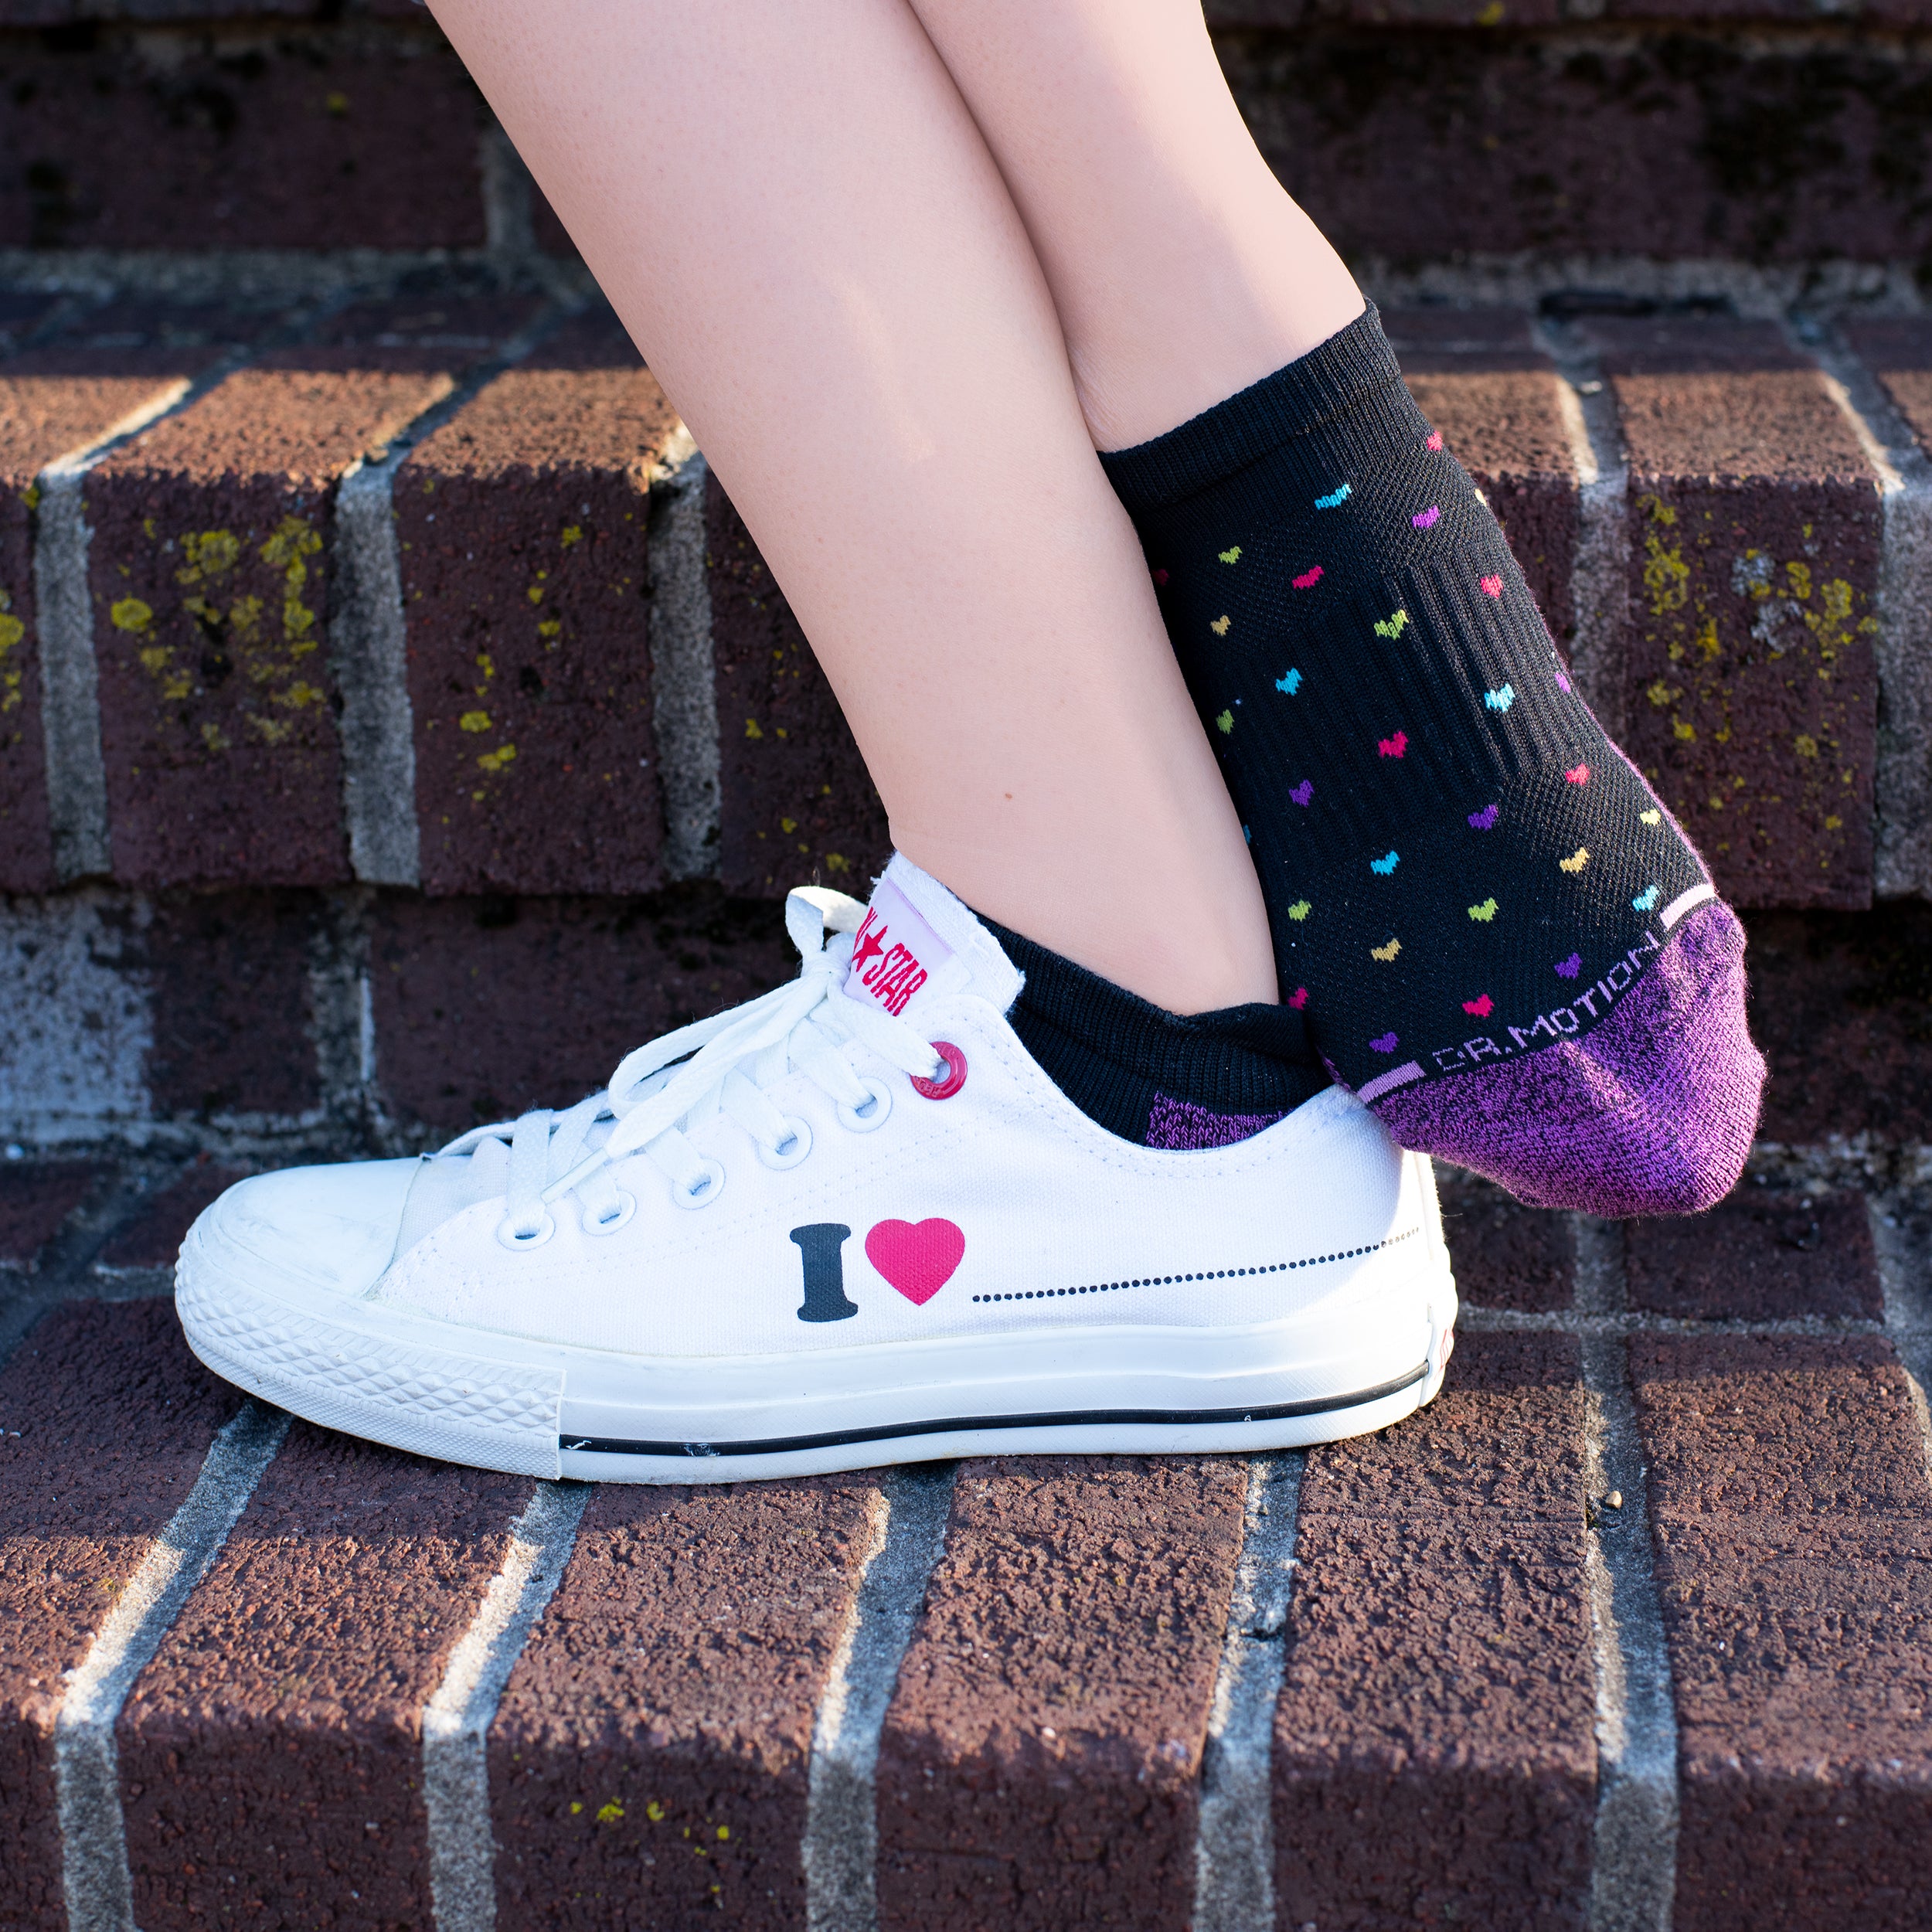 Hearts | Ankle Compression Socks For Women